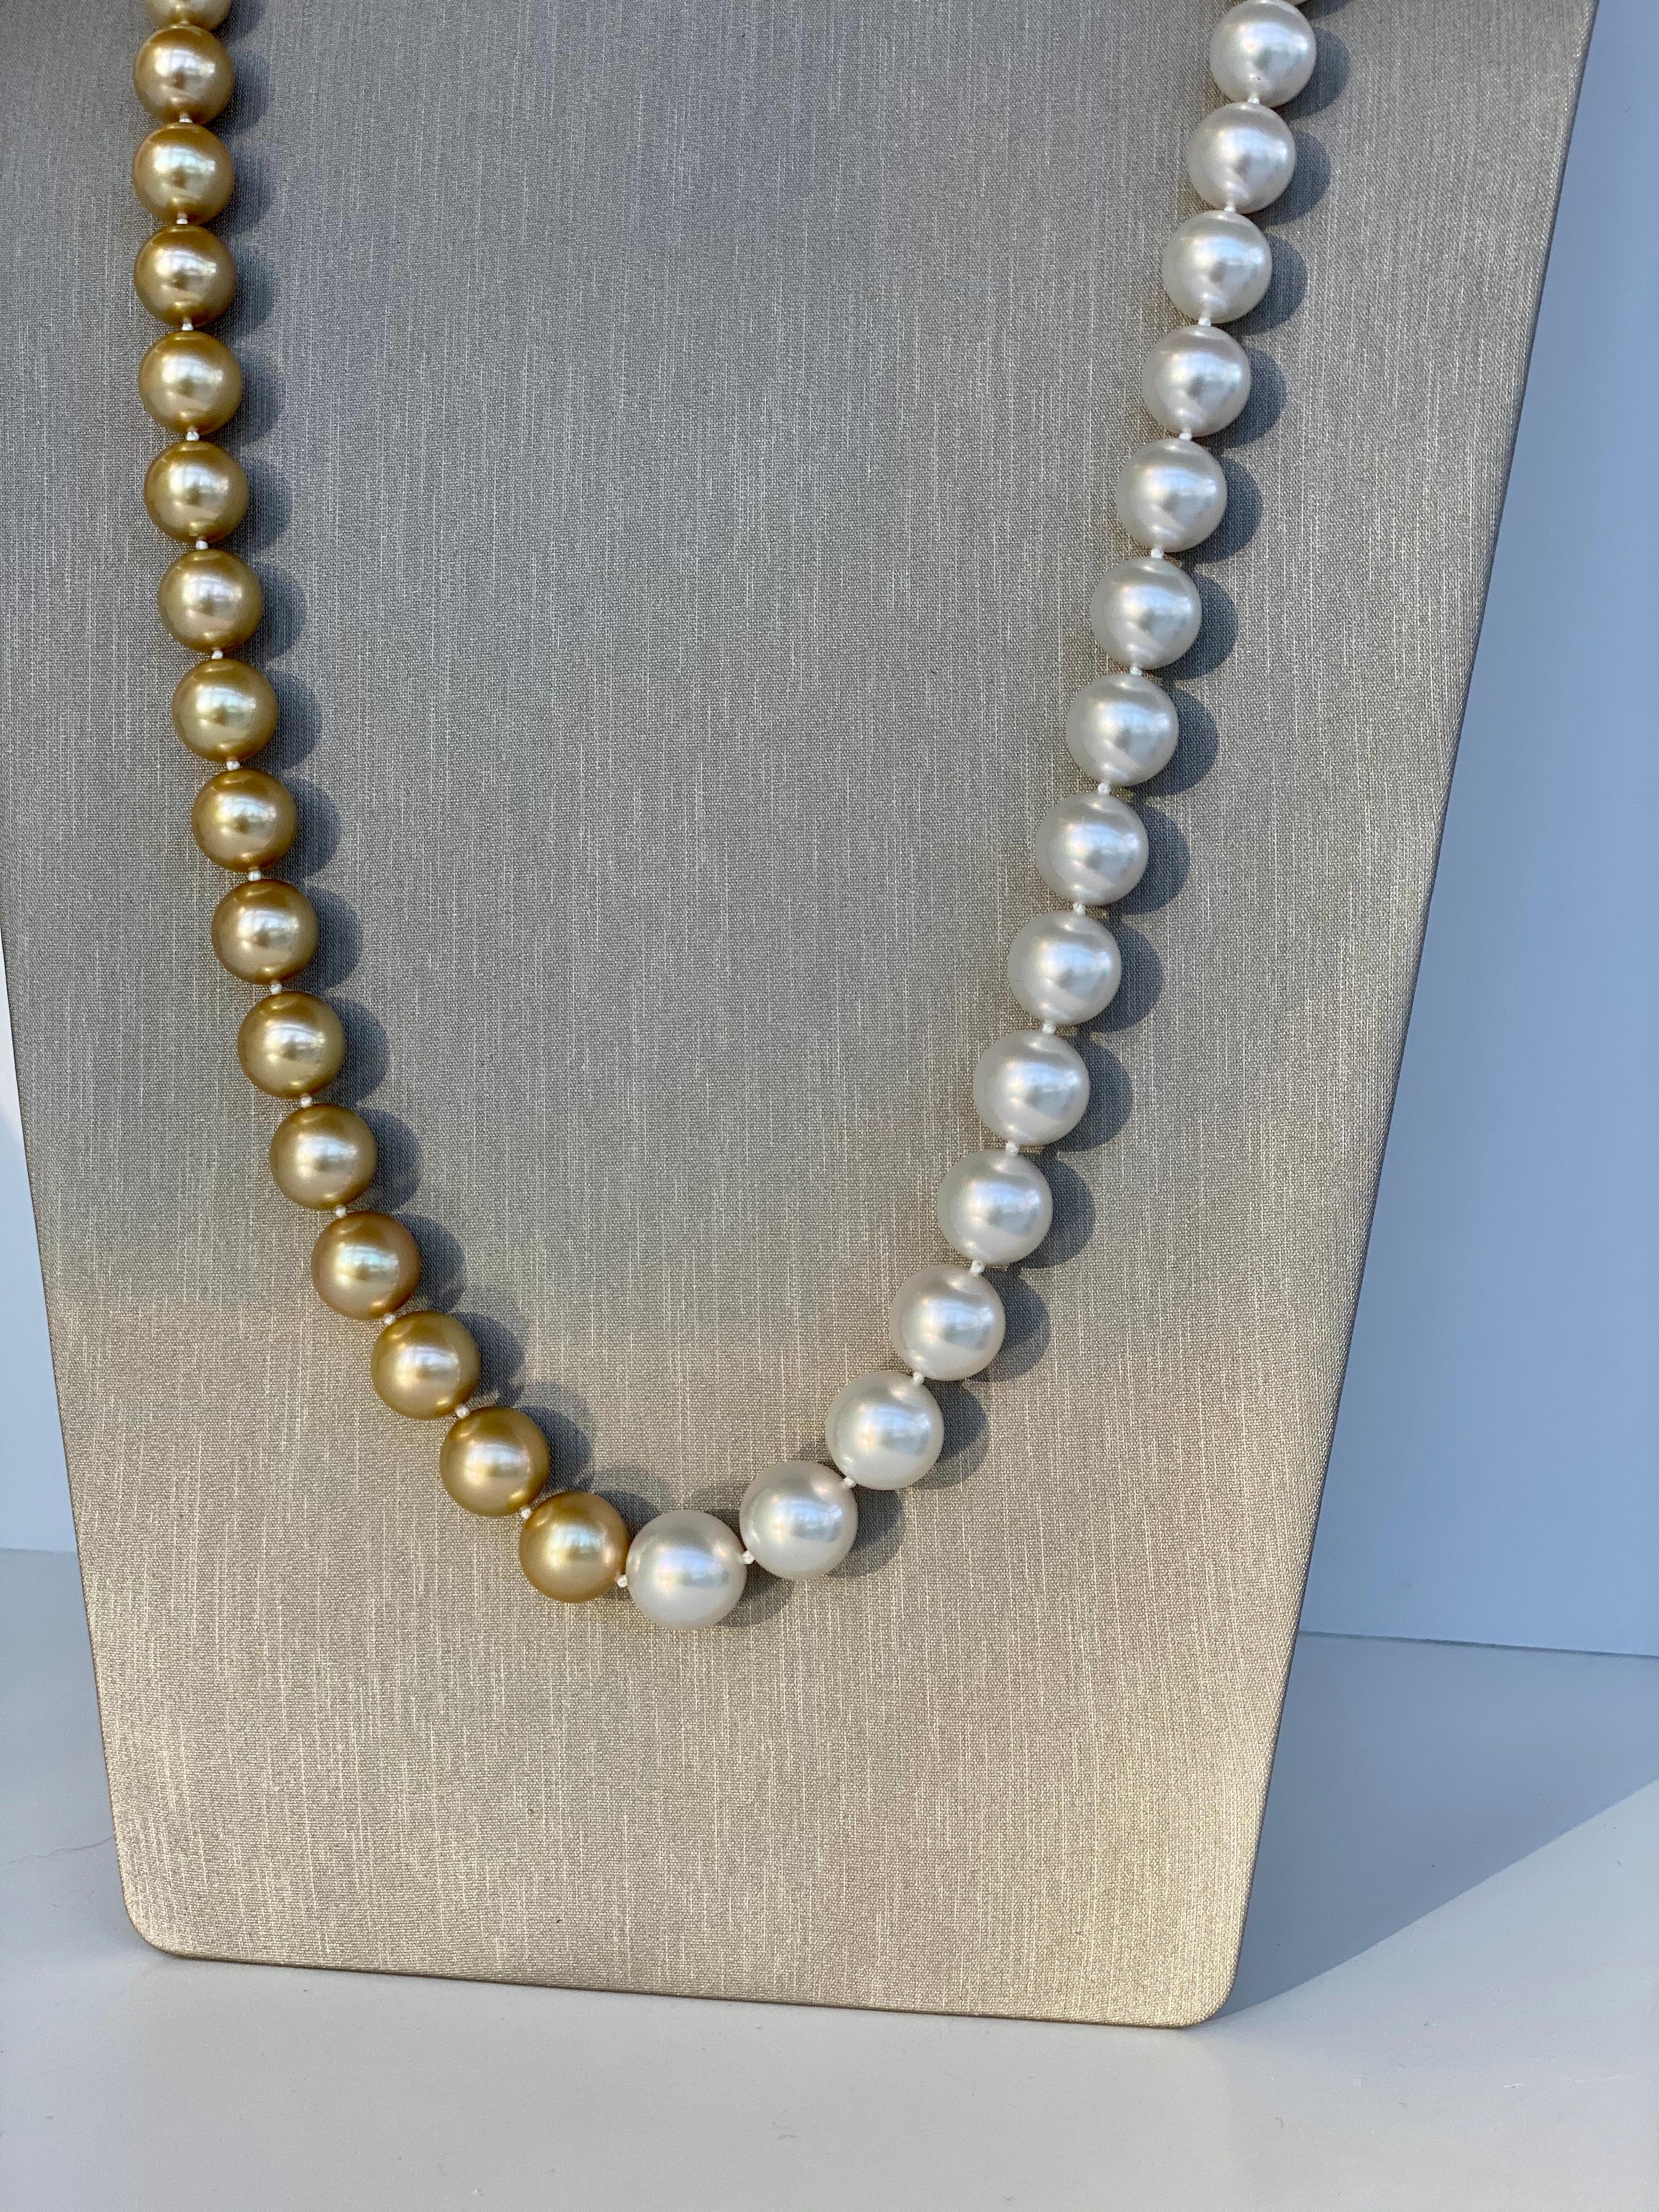 Golden And White South Sea Pearls. This Beautiful one of a kind strand of pearls features 31 Golden South Sea Pearls ranging in size from    mm to   mm and 32 Cream South Sea Pearls ranging in size from    mm too mm.   30 inches in length so can be